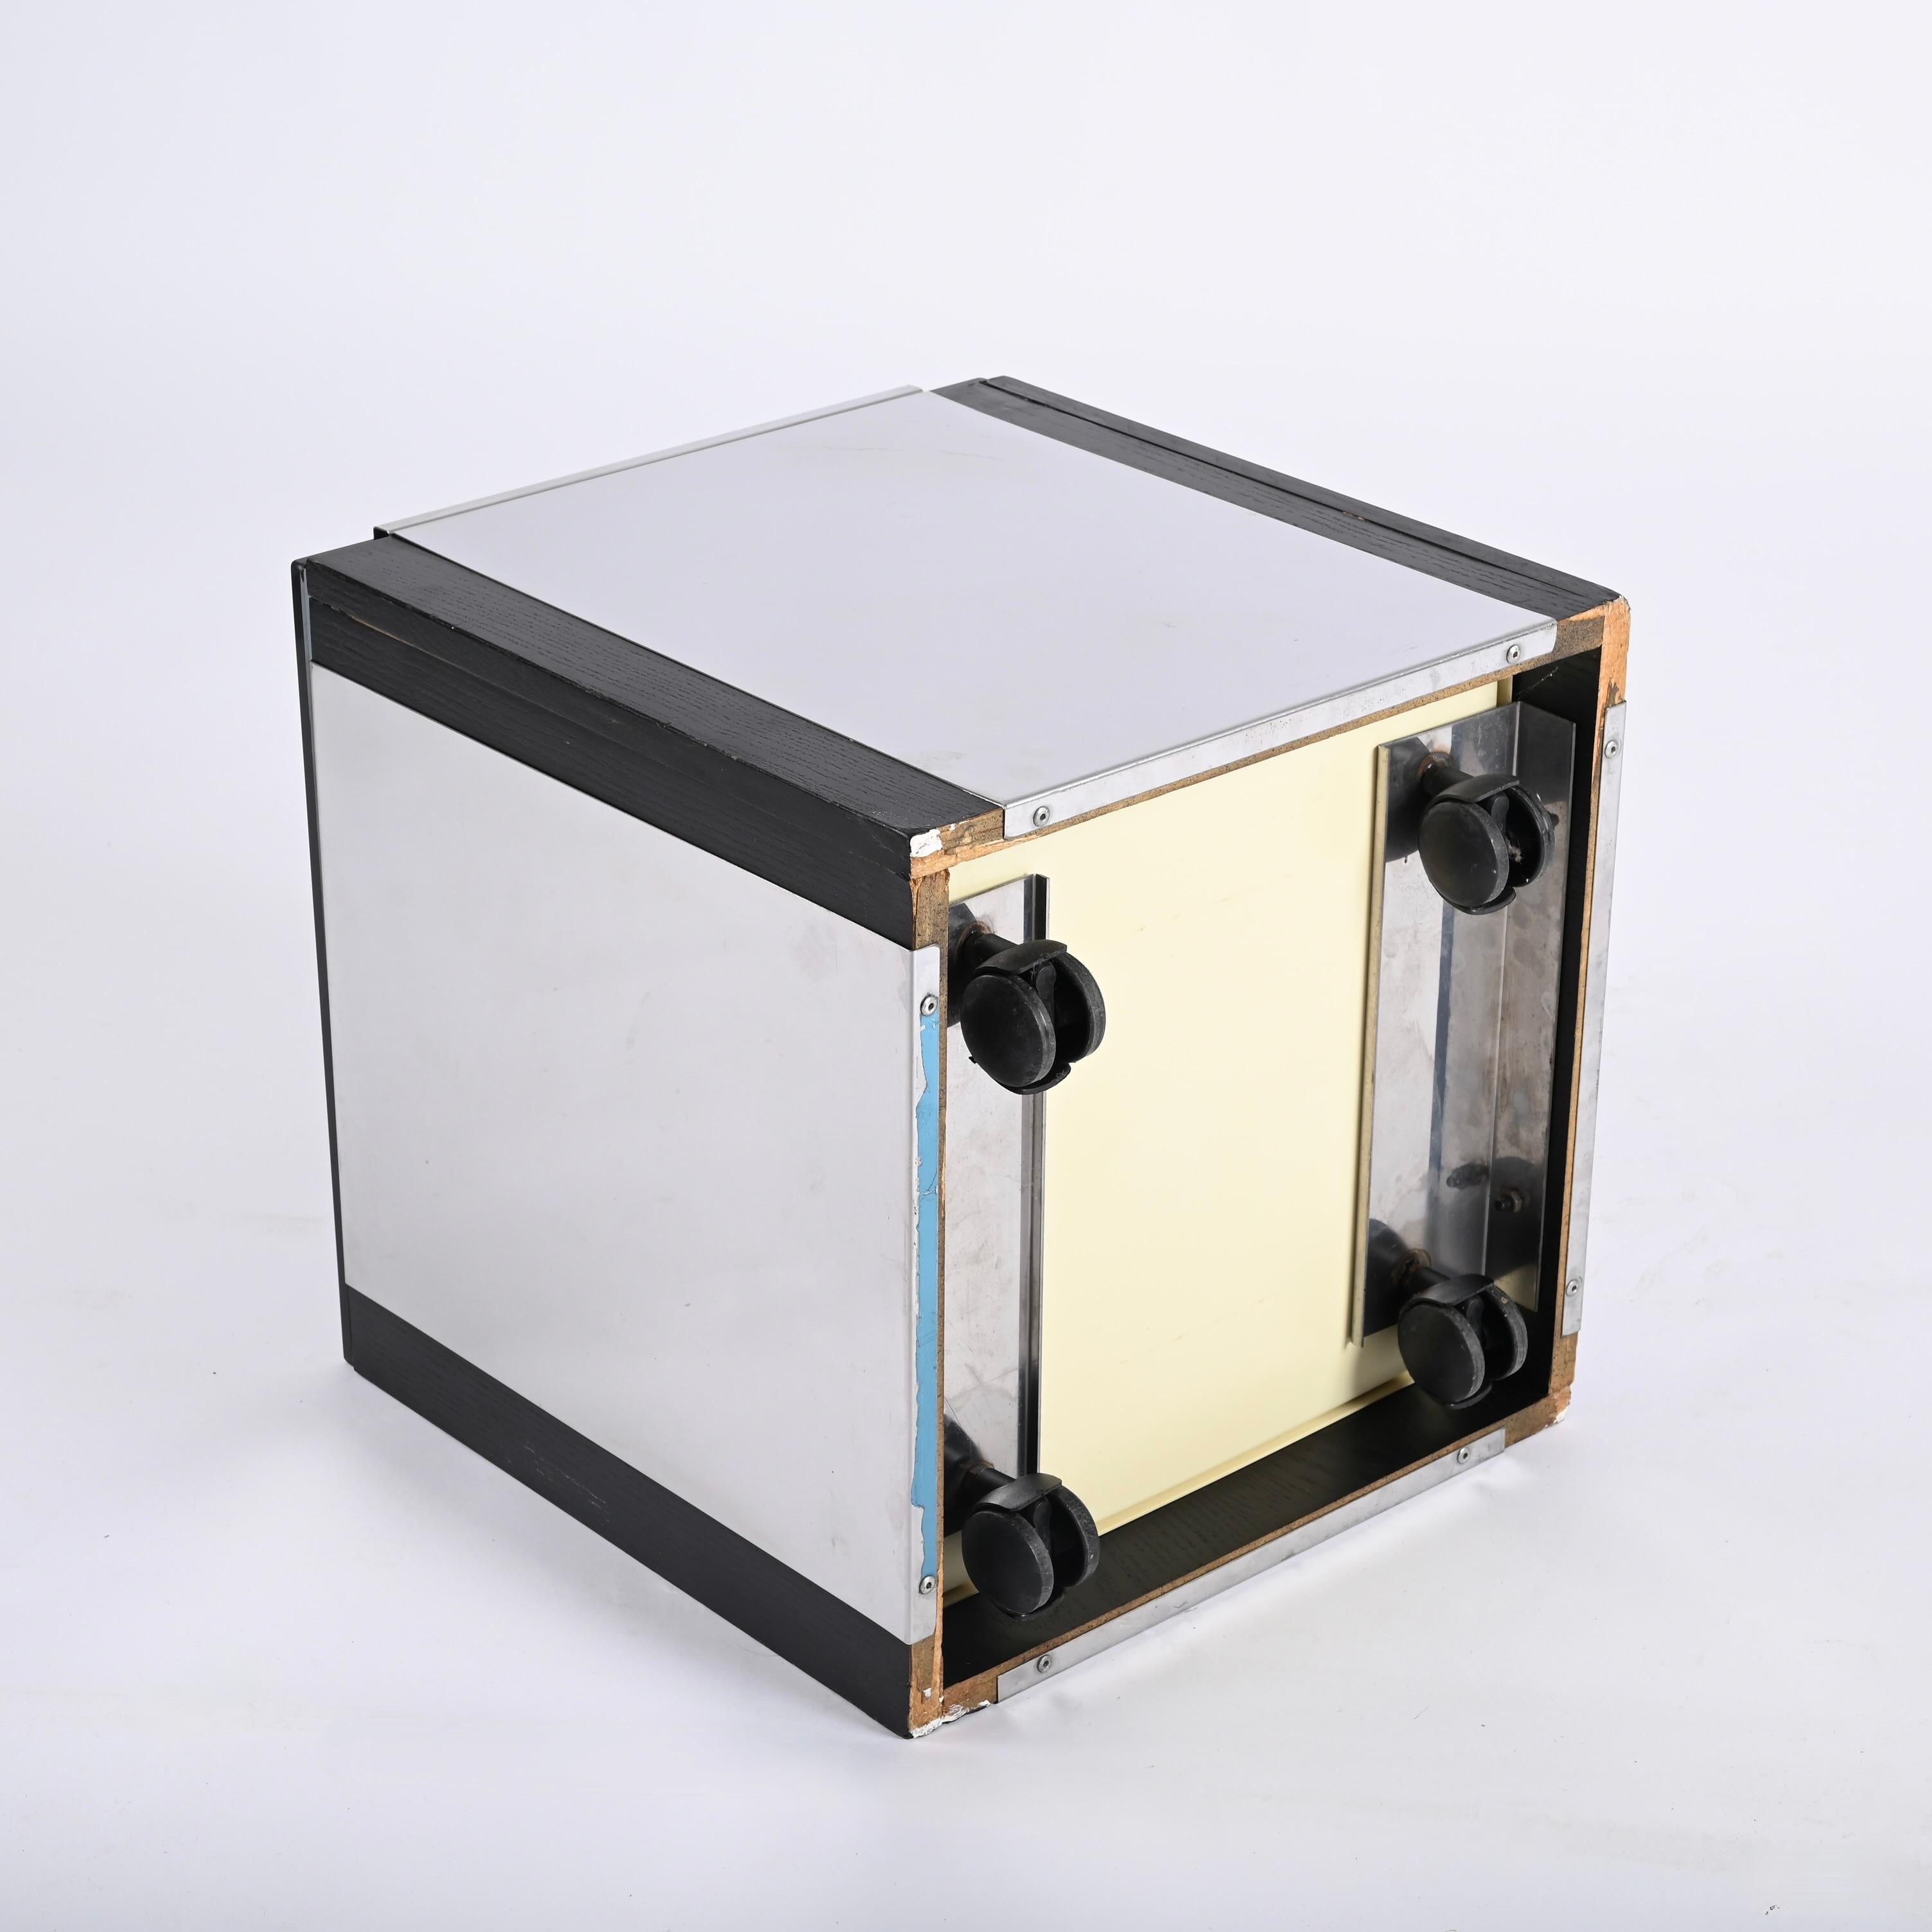 Willy Rizzo Midcentury Cubic Chromed Steel, Wood and Glass Dry Bar, Italy 1970s For Sale 10